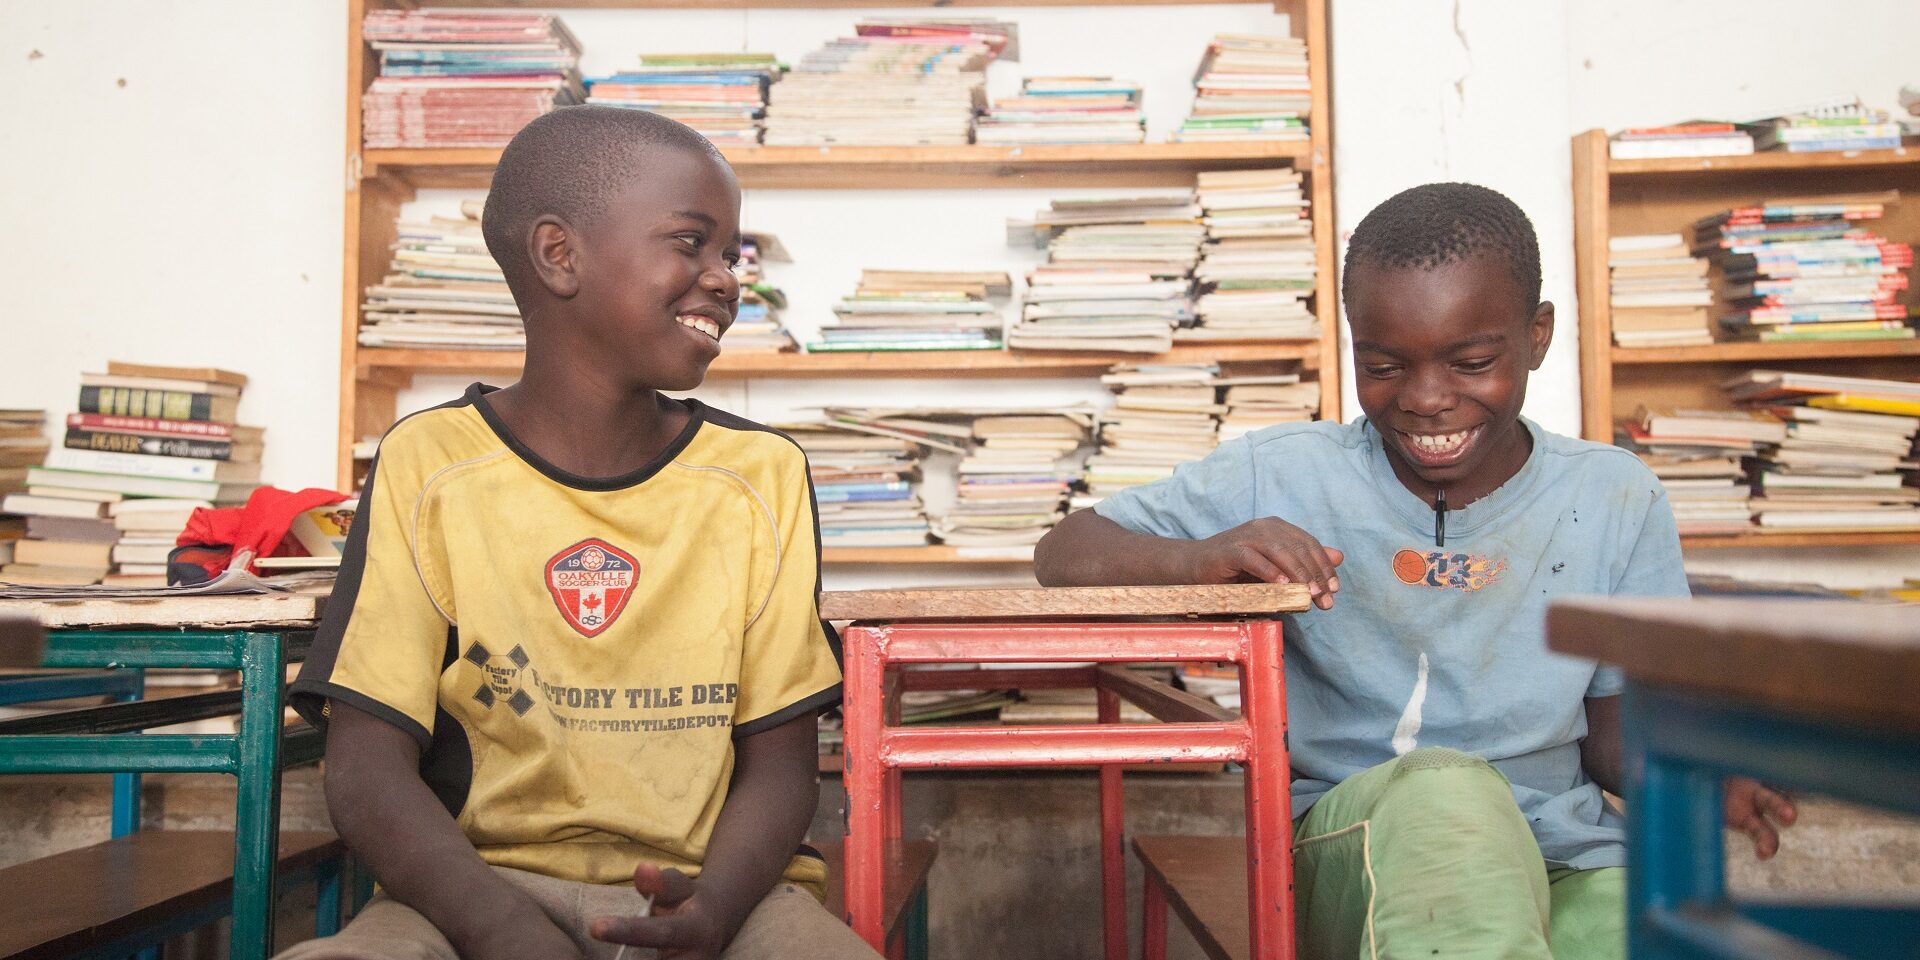 Two smiling schoolboys in Zambia sitting in front of bookshelves